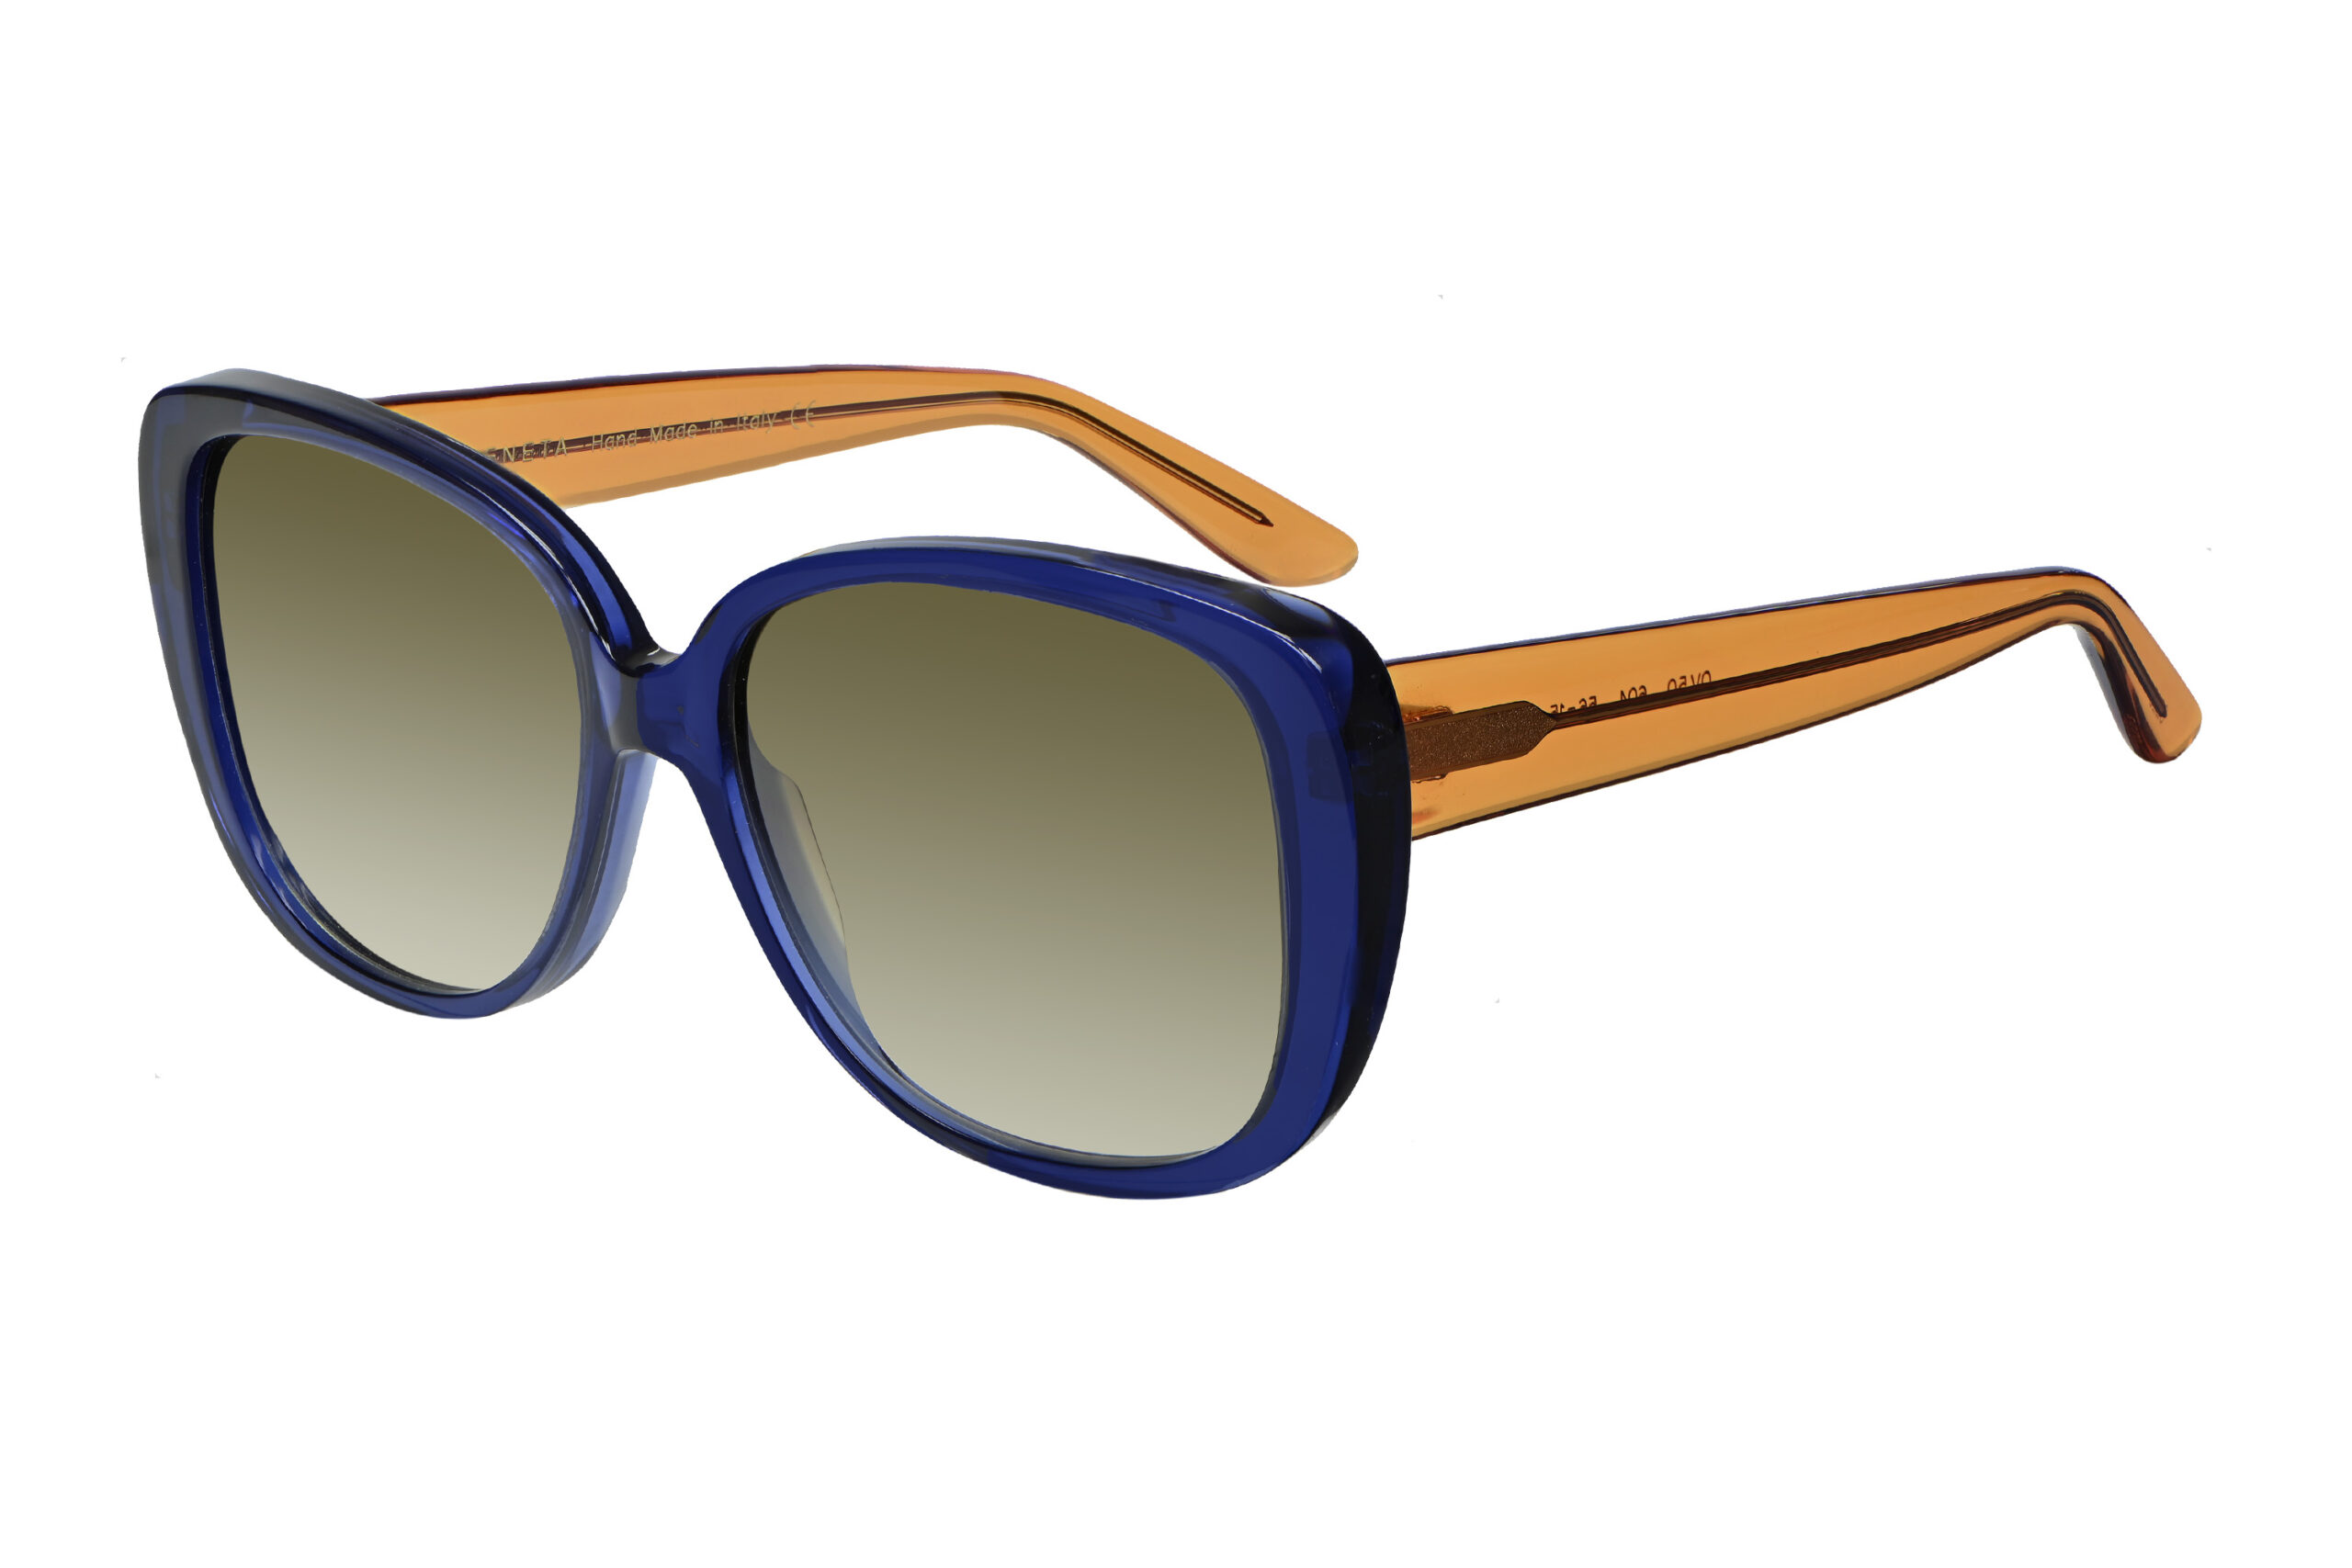 OV50 c.604 – Royal blue front with marigold temples